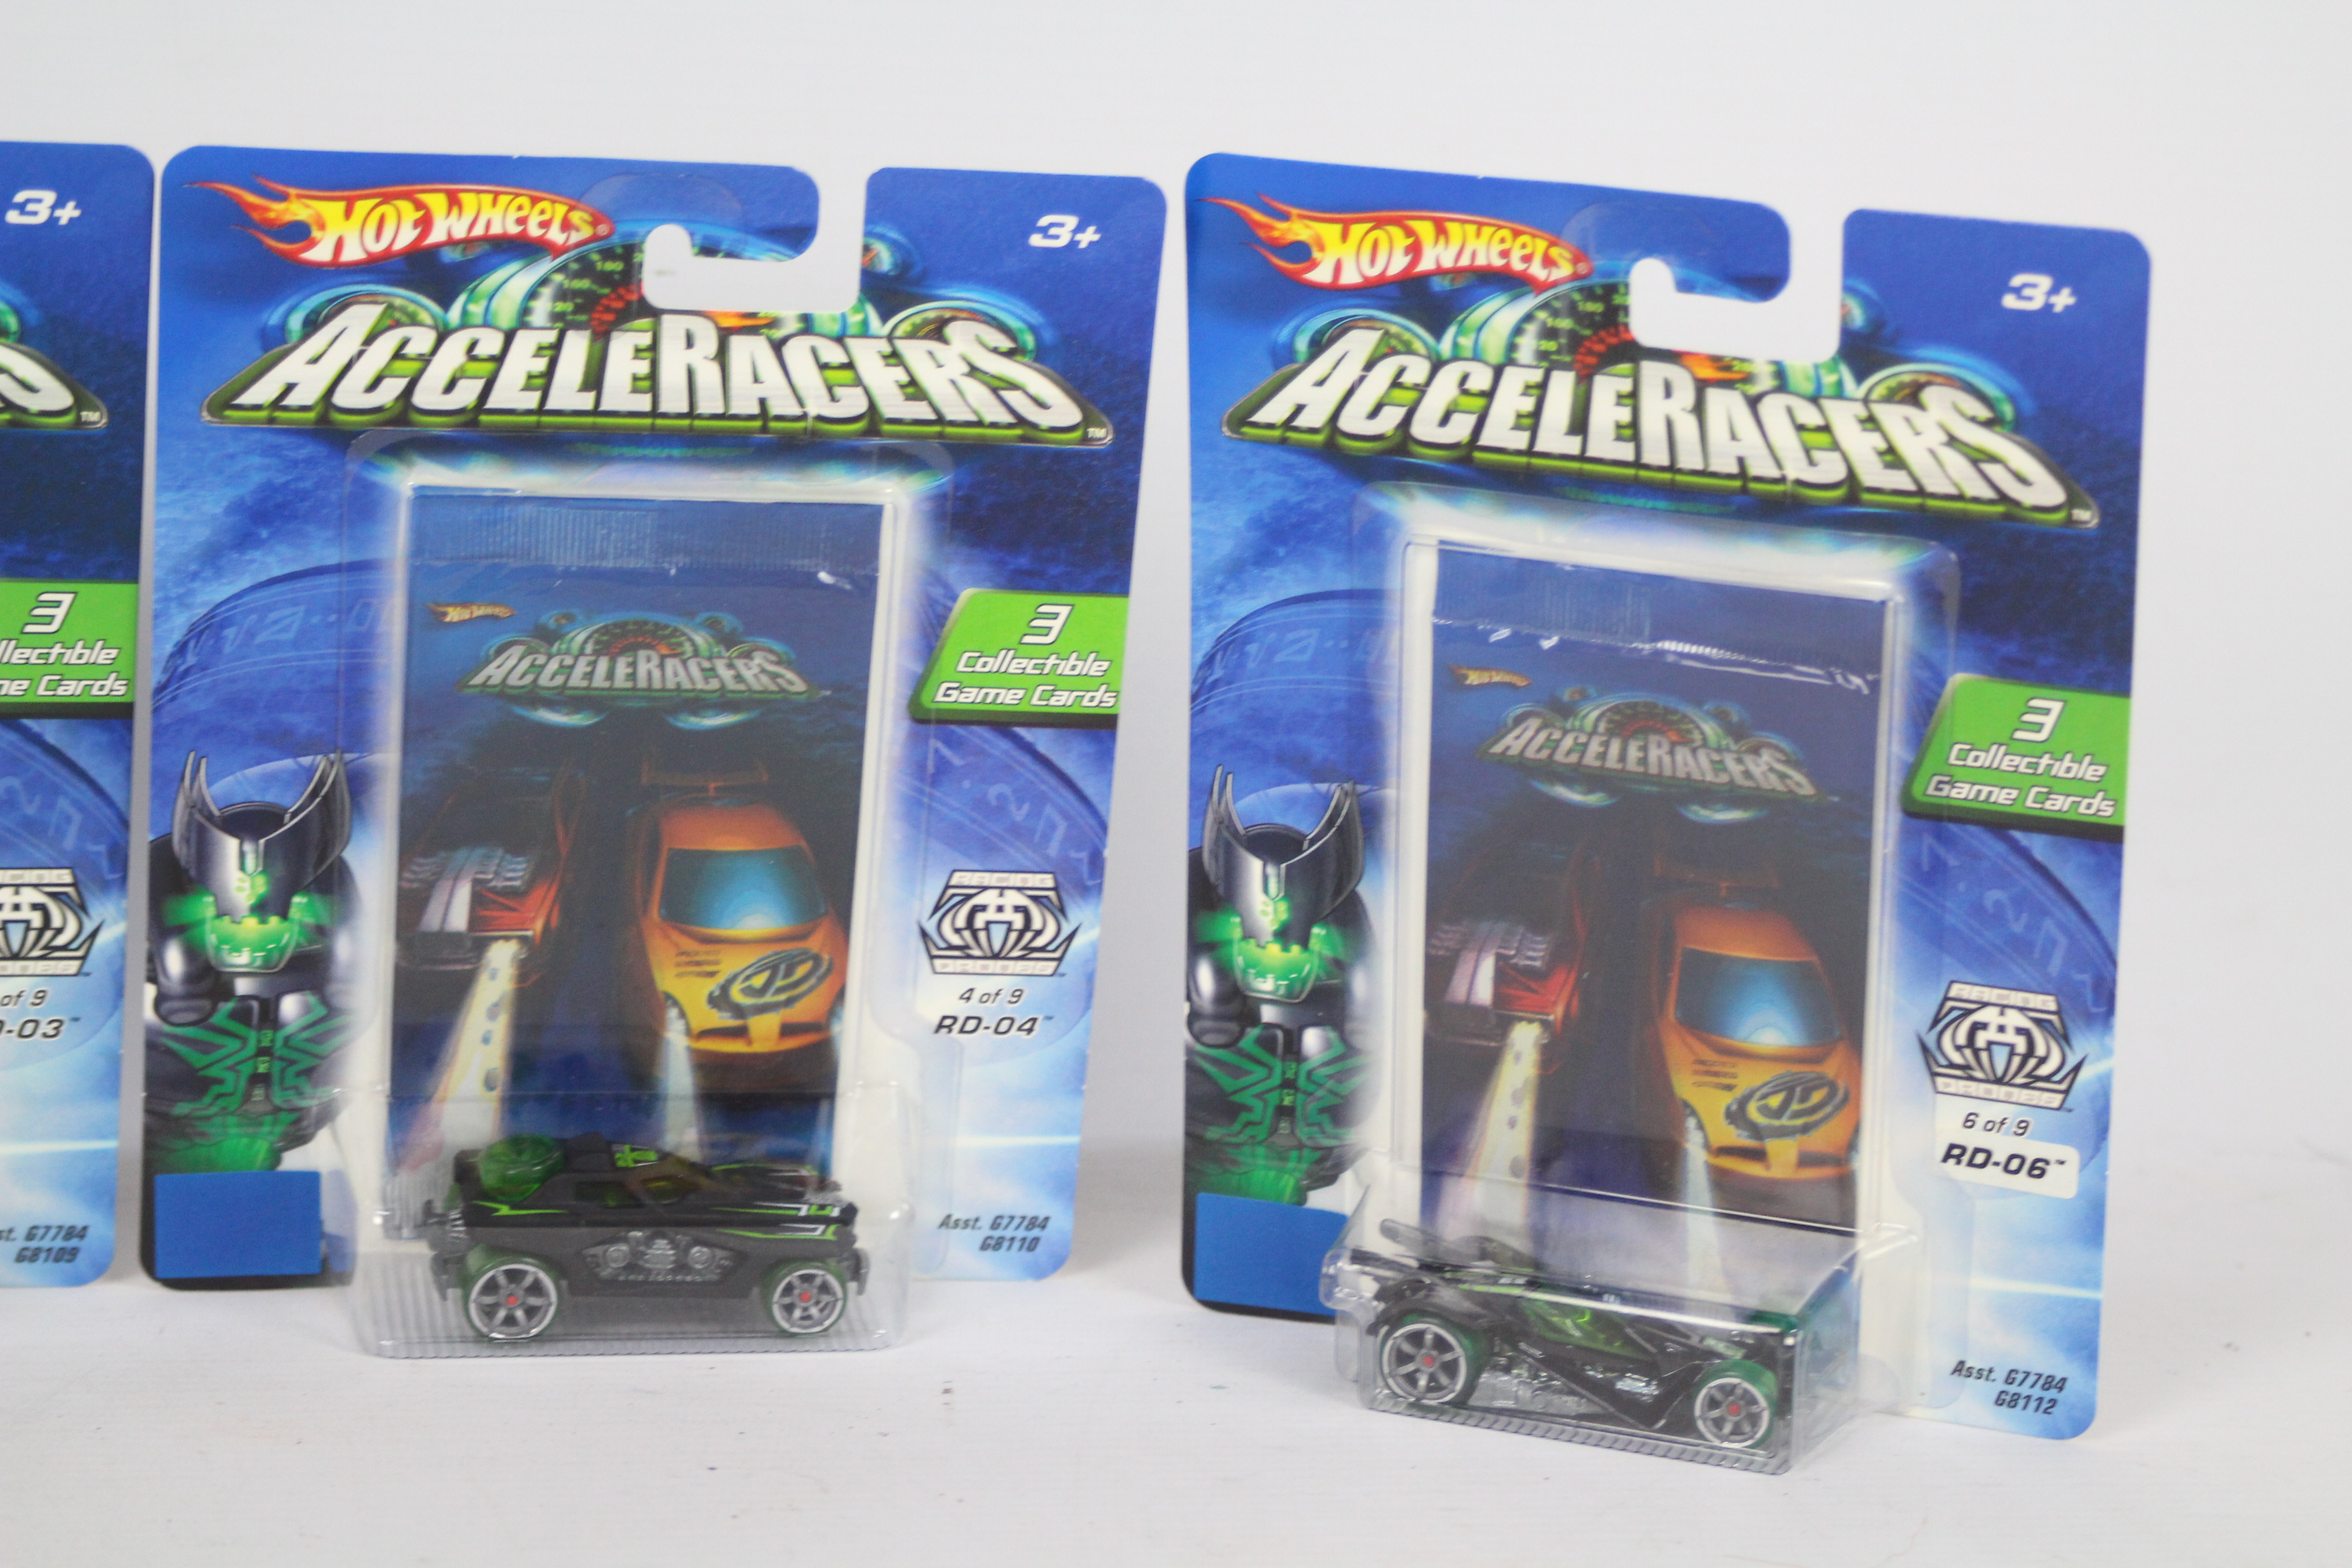 Hot Wheels - Acceleracers - 4 x unopened models from the Racing Drones range, RD-03 # G8109, - Image 2 of 3